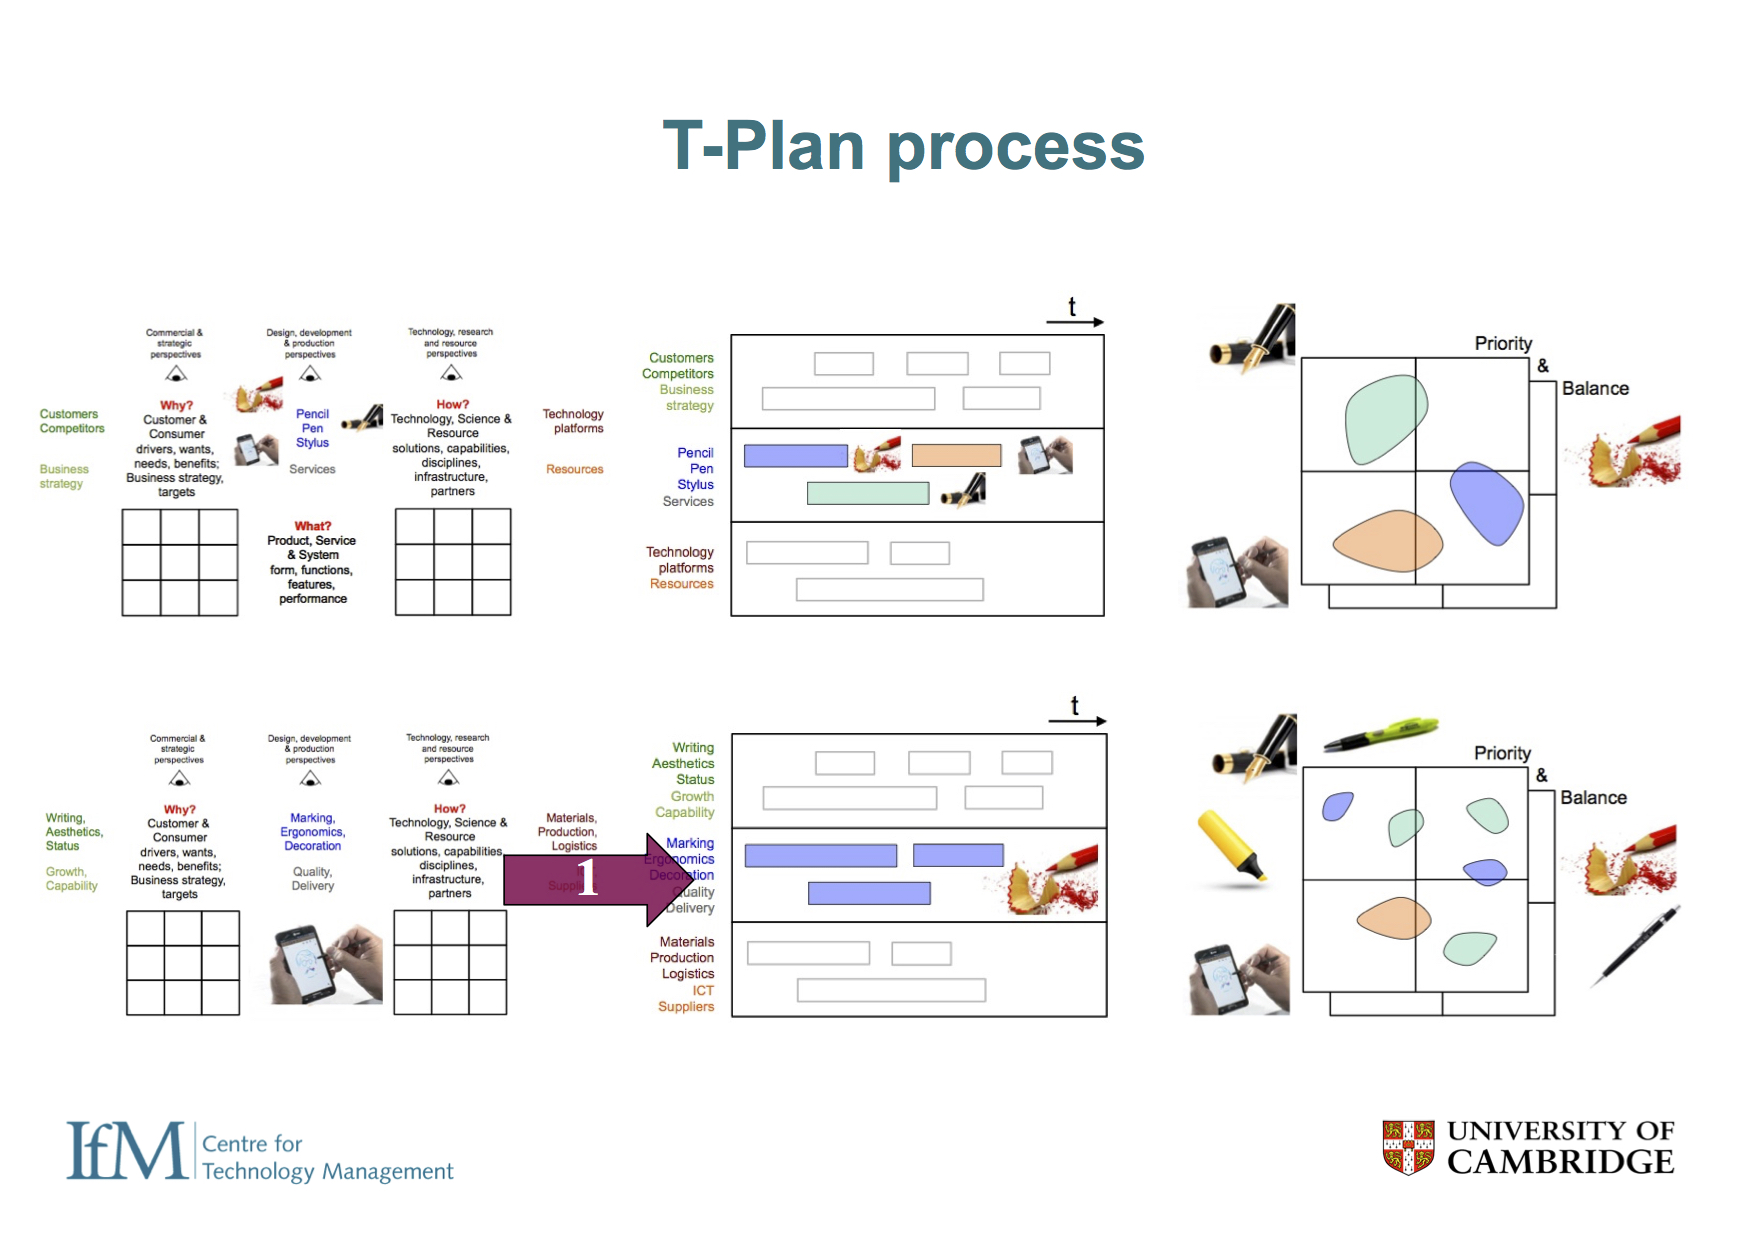  ... and the T-Plan approach is shown here. S-Plan and T-Plan are two stable references processes, which are useful starting points, but should not be considered static or prescriptive. When viewed through the lens of the scalable toolkit platform it